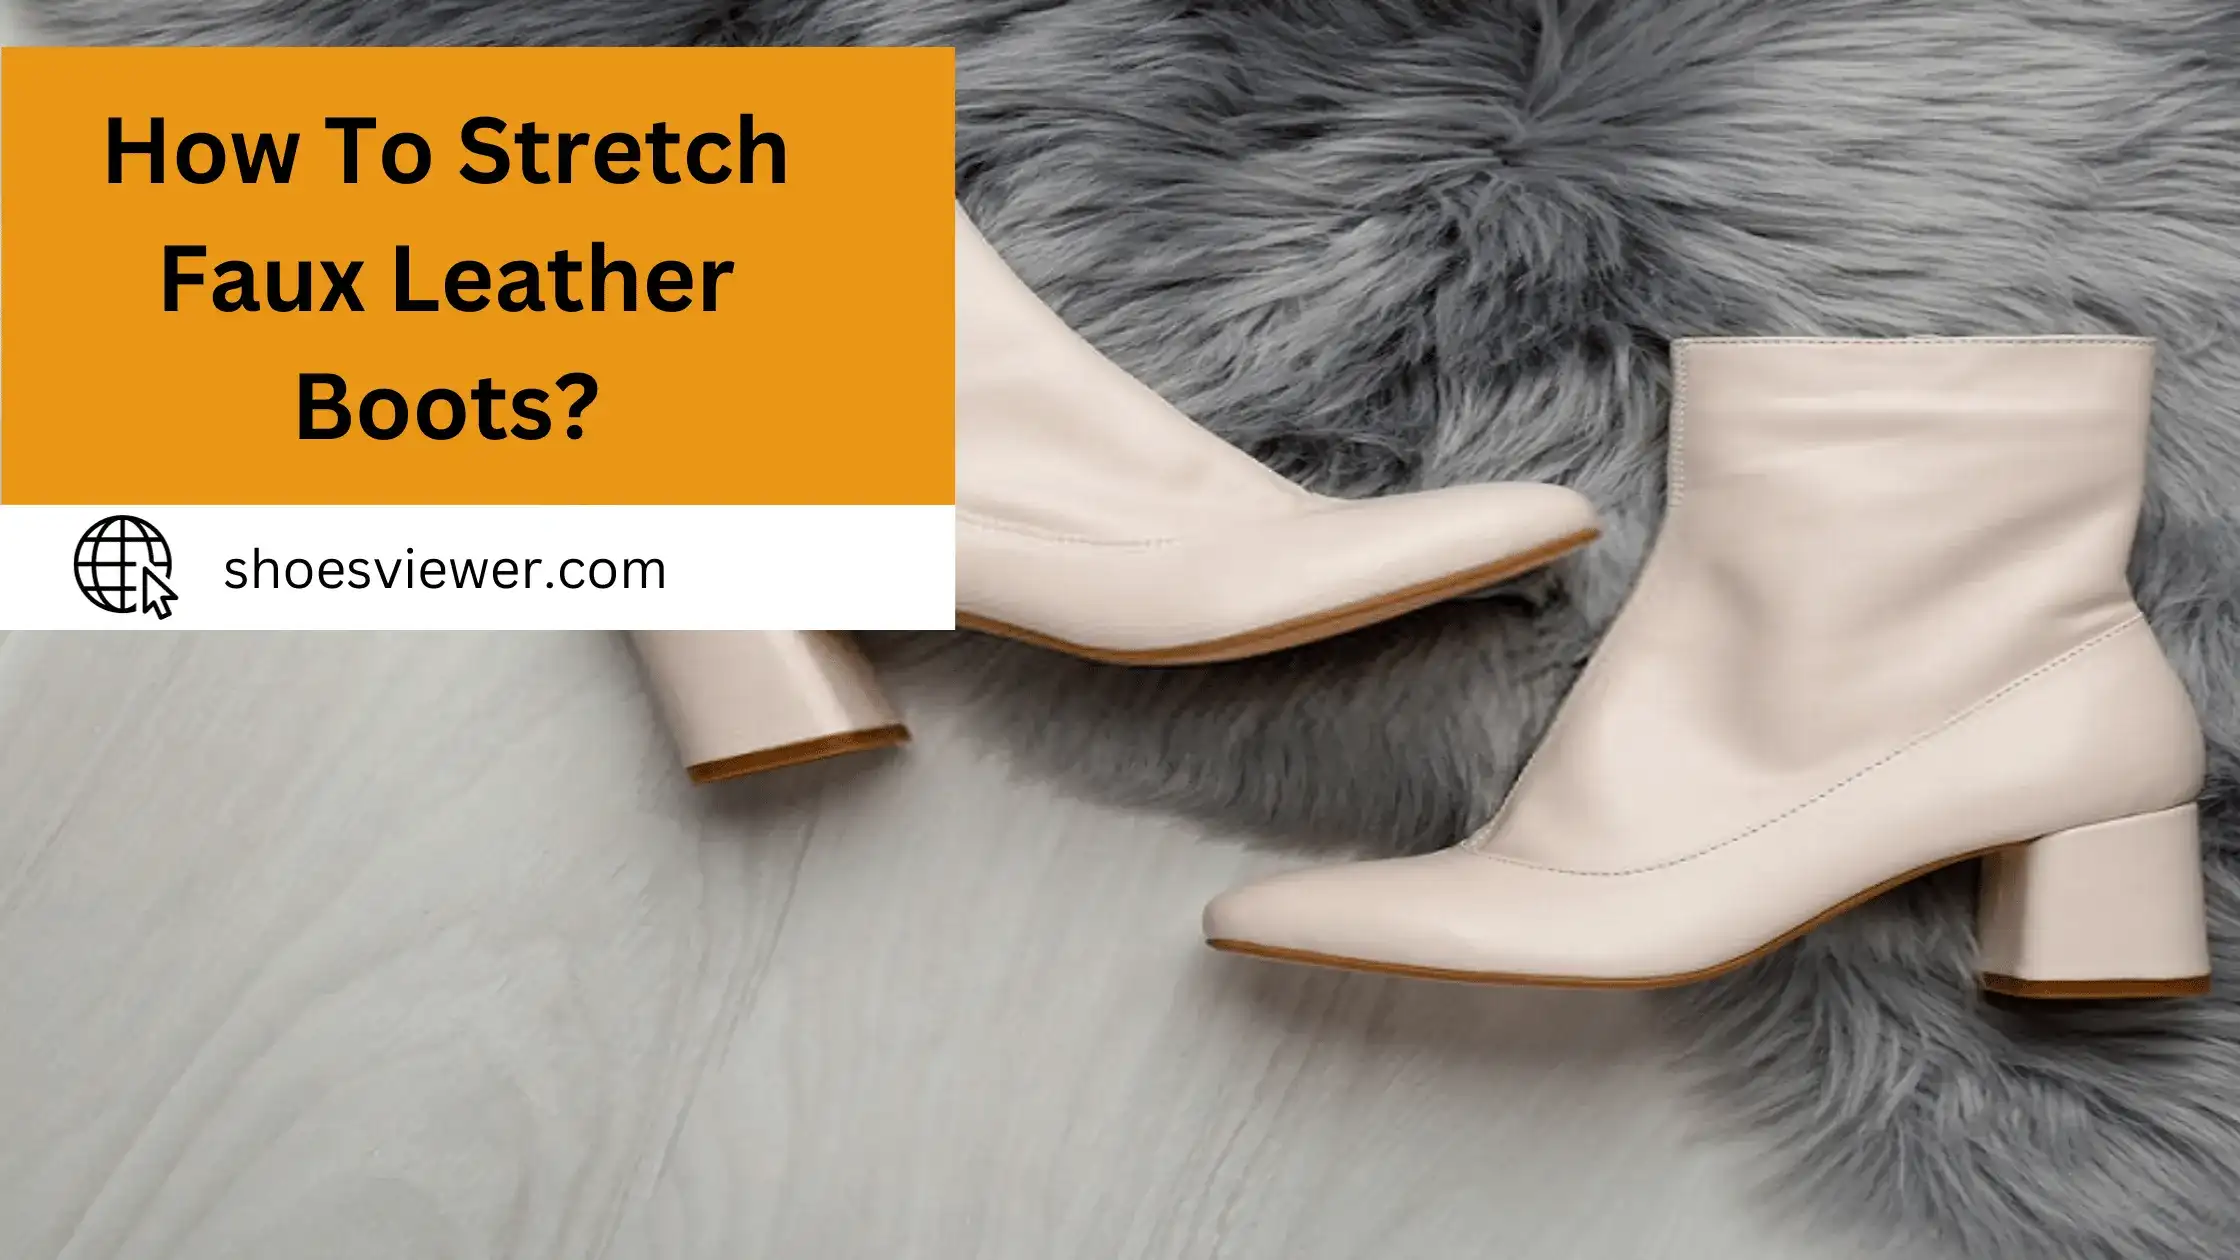 How To Stretch Faux Leather Boots? (An In-Depth Guide)